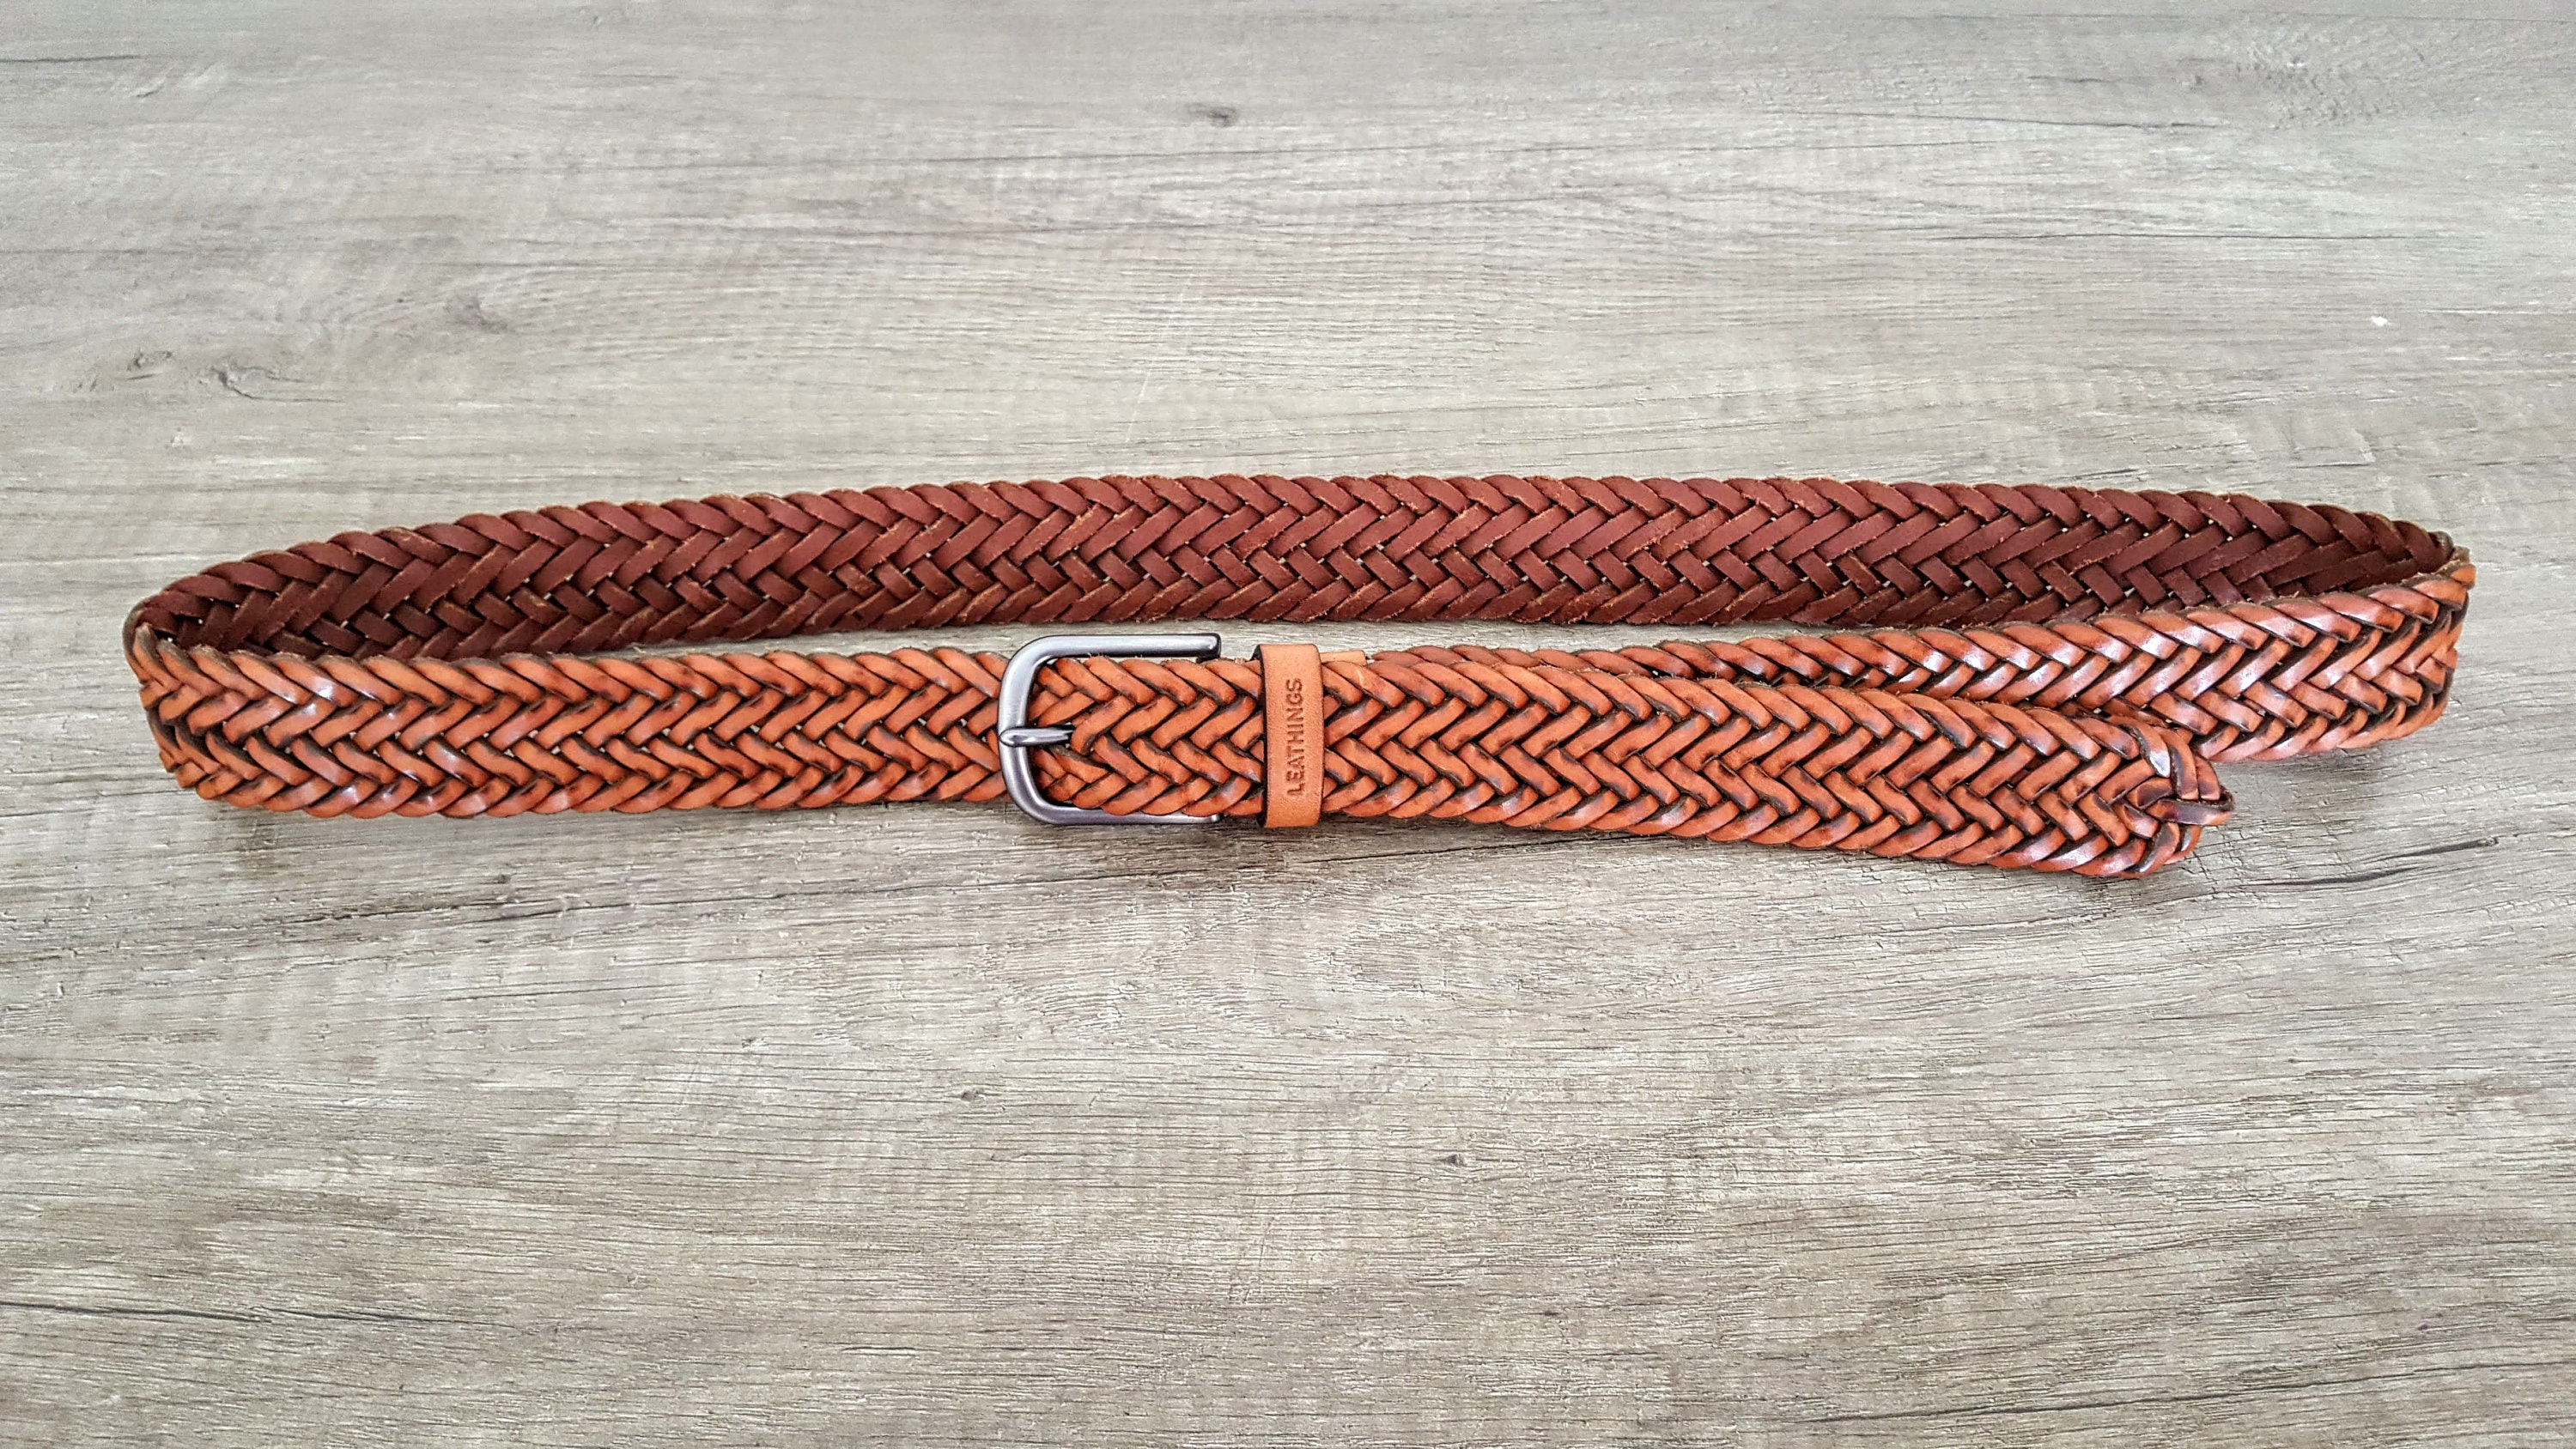 Braided Tan Leather Belt Handcrafted Vegetabled Leather Belts for